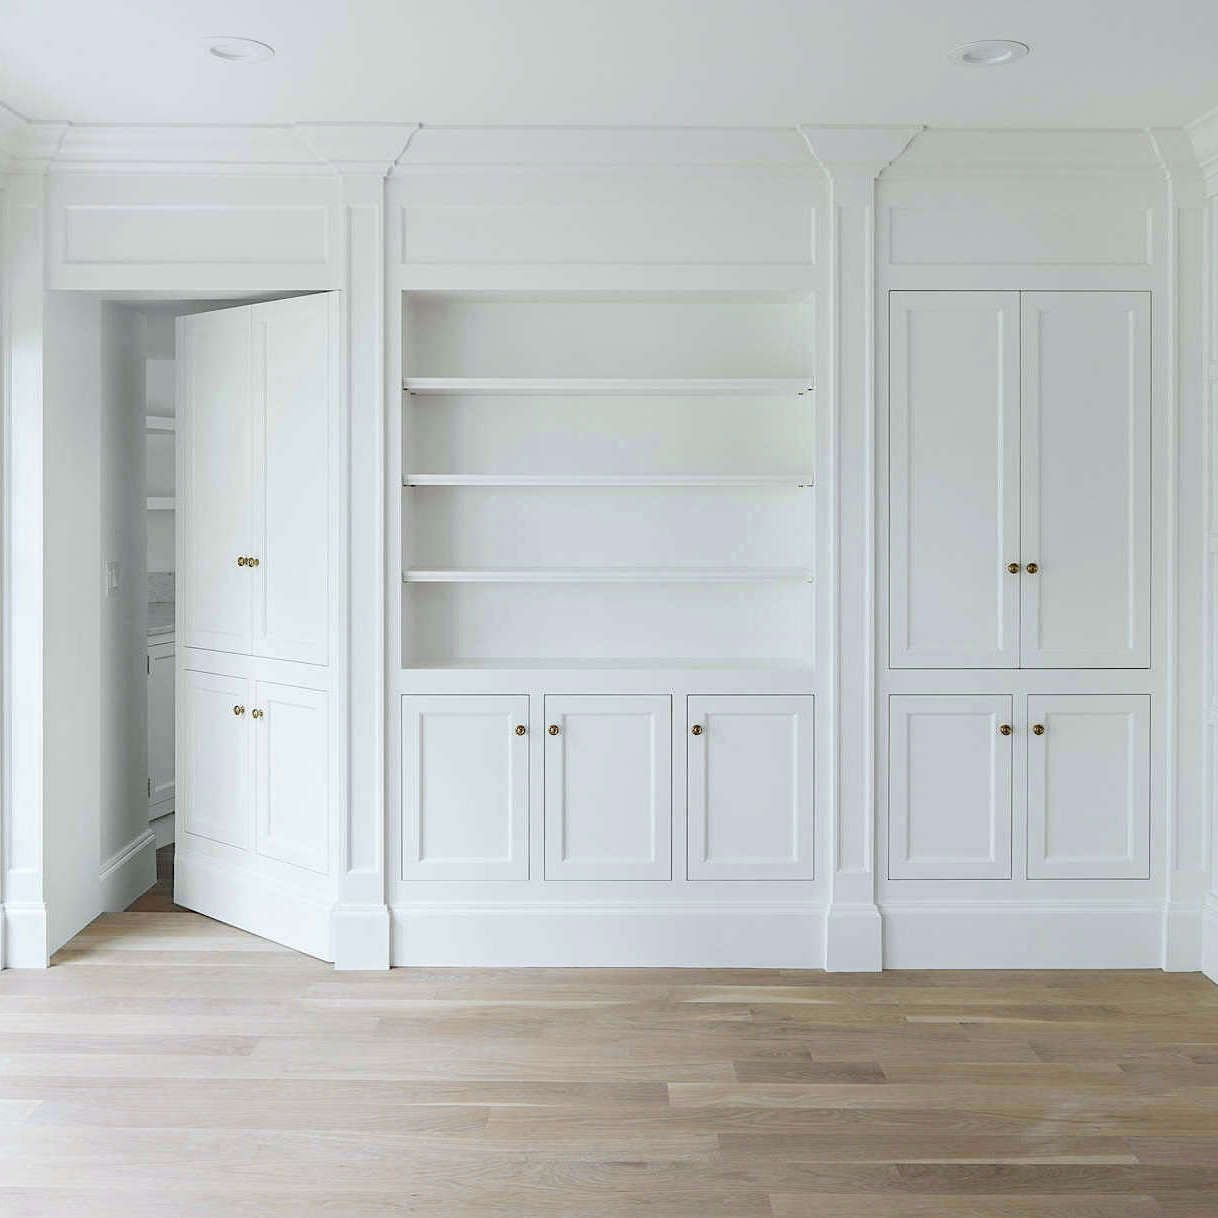 Unlocking the mystery: secret doors and hidden rooms in modern homes